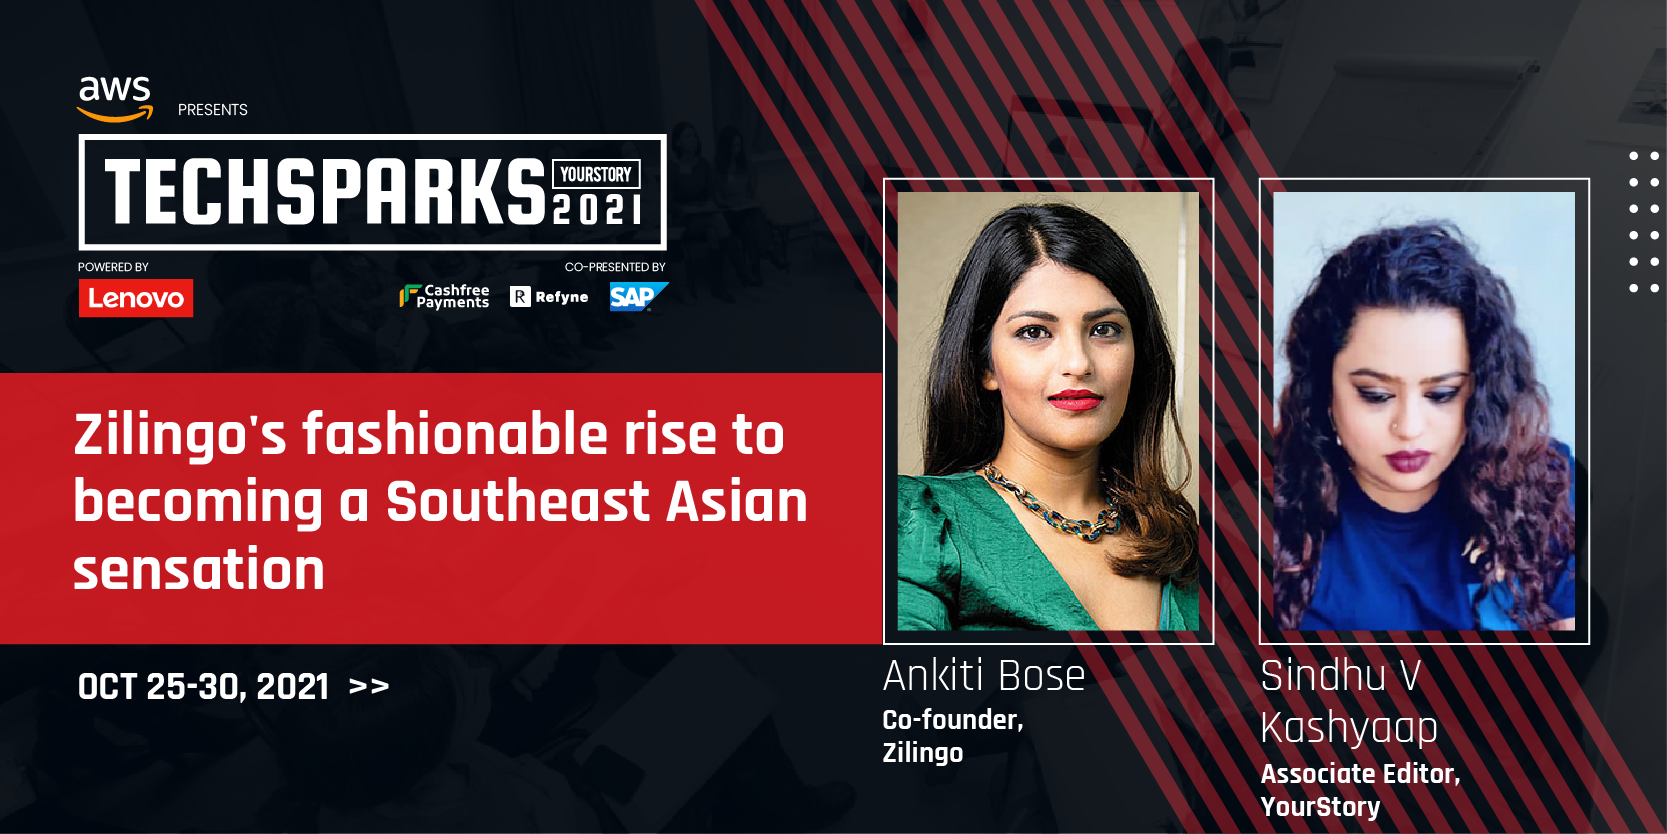 While starting up, think about the opportunity and the magnitude of what you can build, despite the challenges: Ankiti Bose